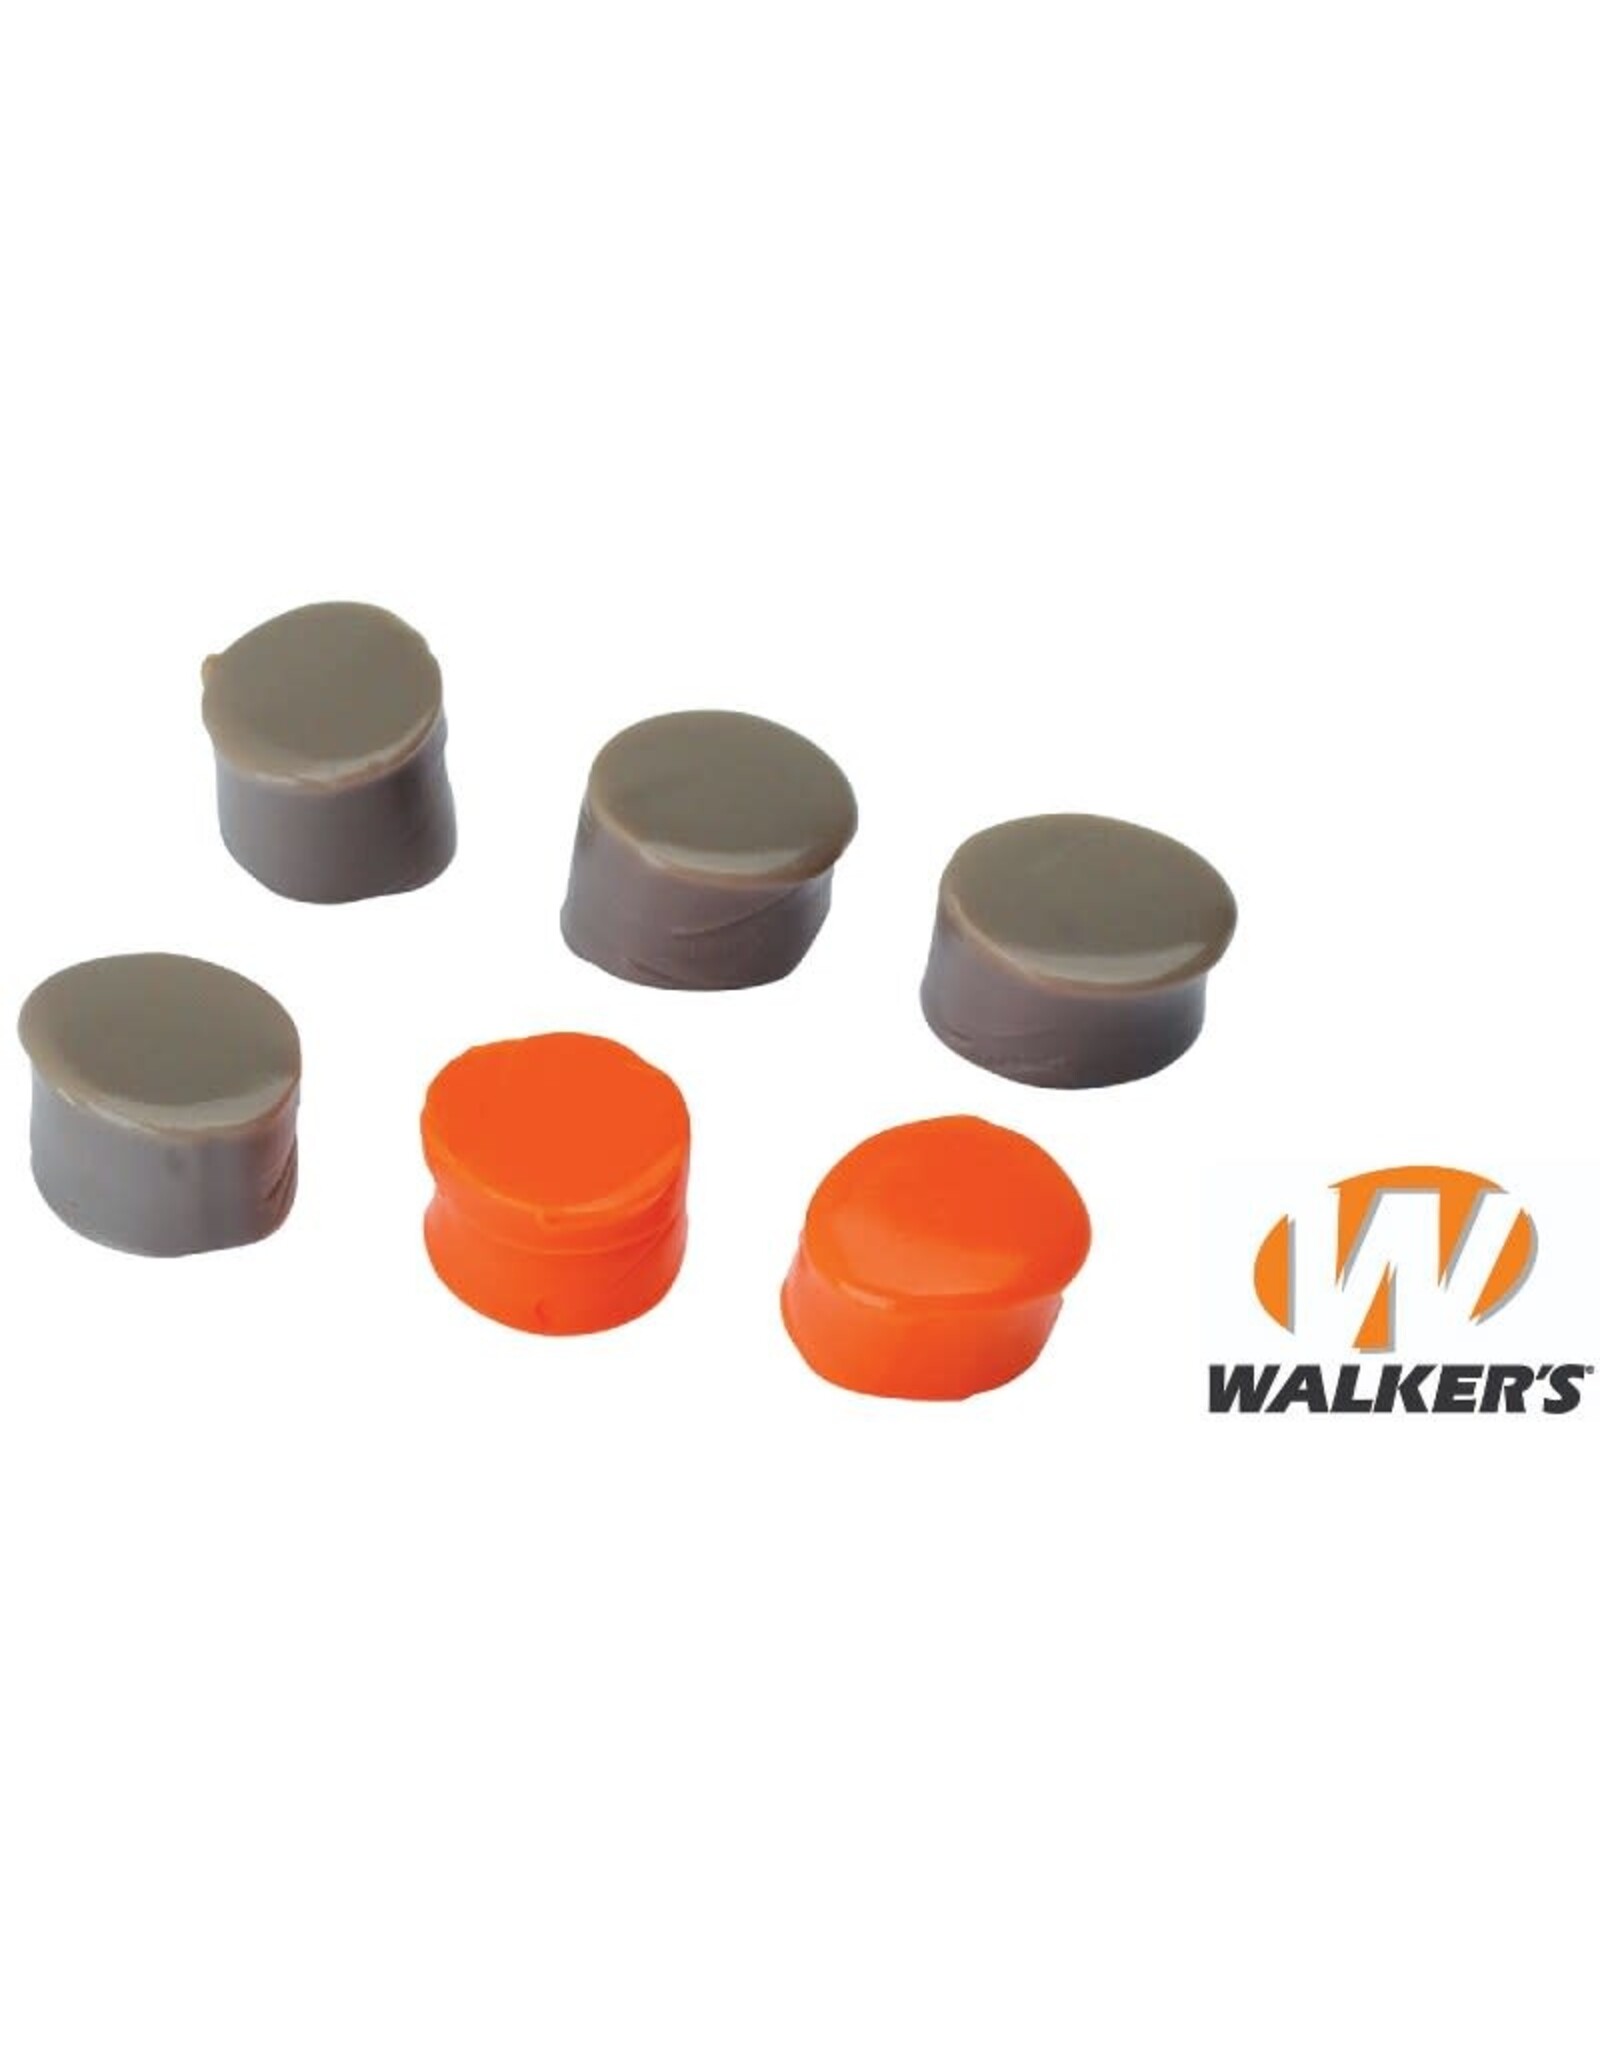 Walkers Silicone Putty Hearing Protection - Gray & Orange